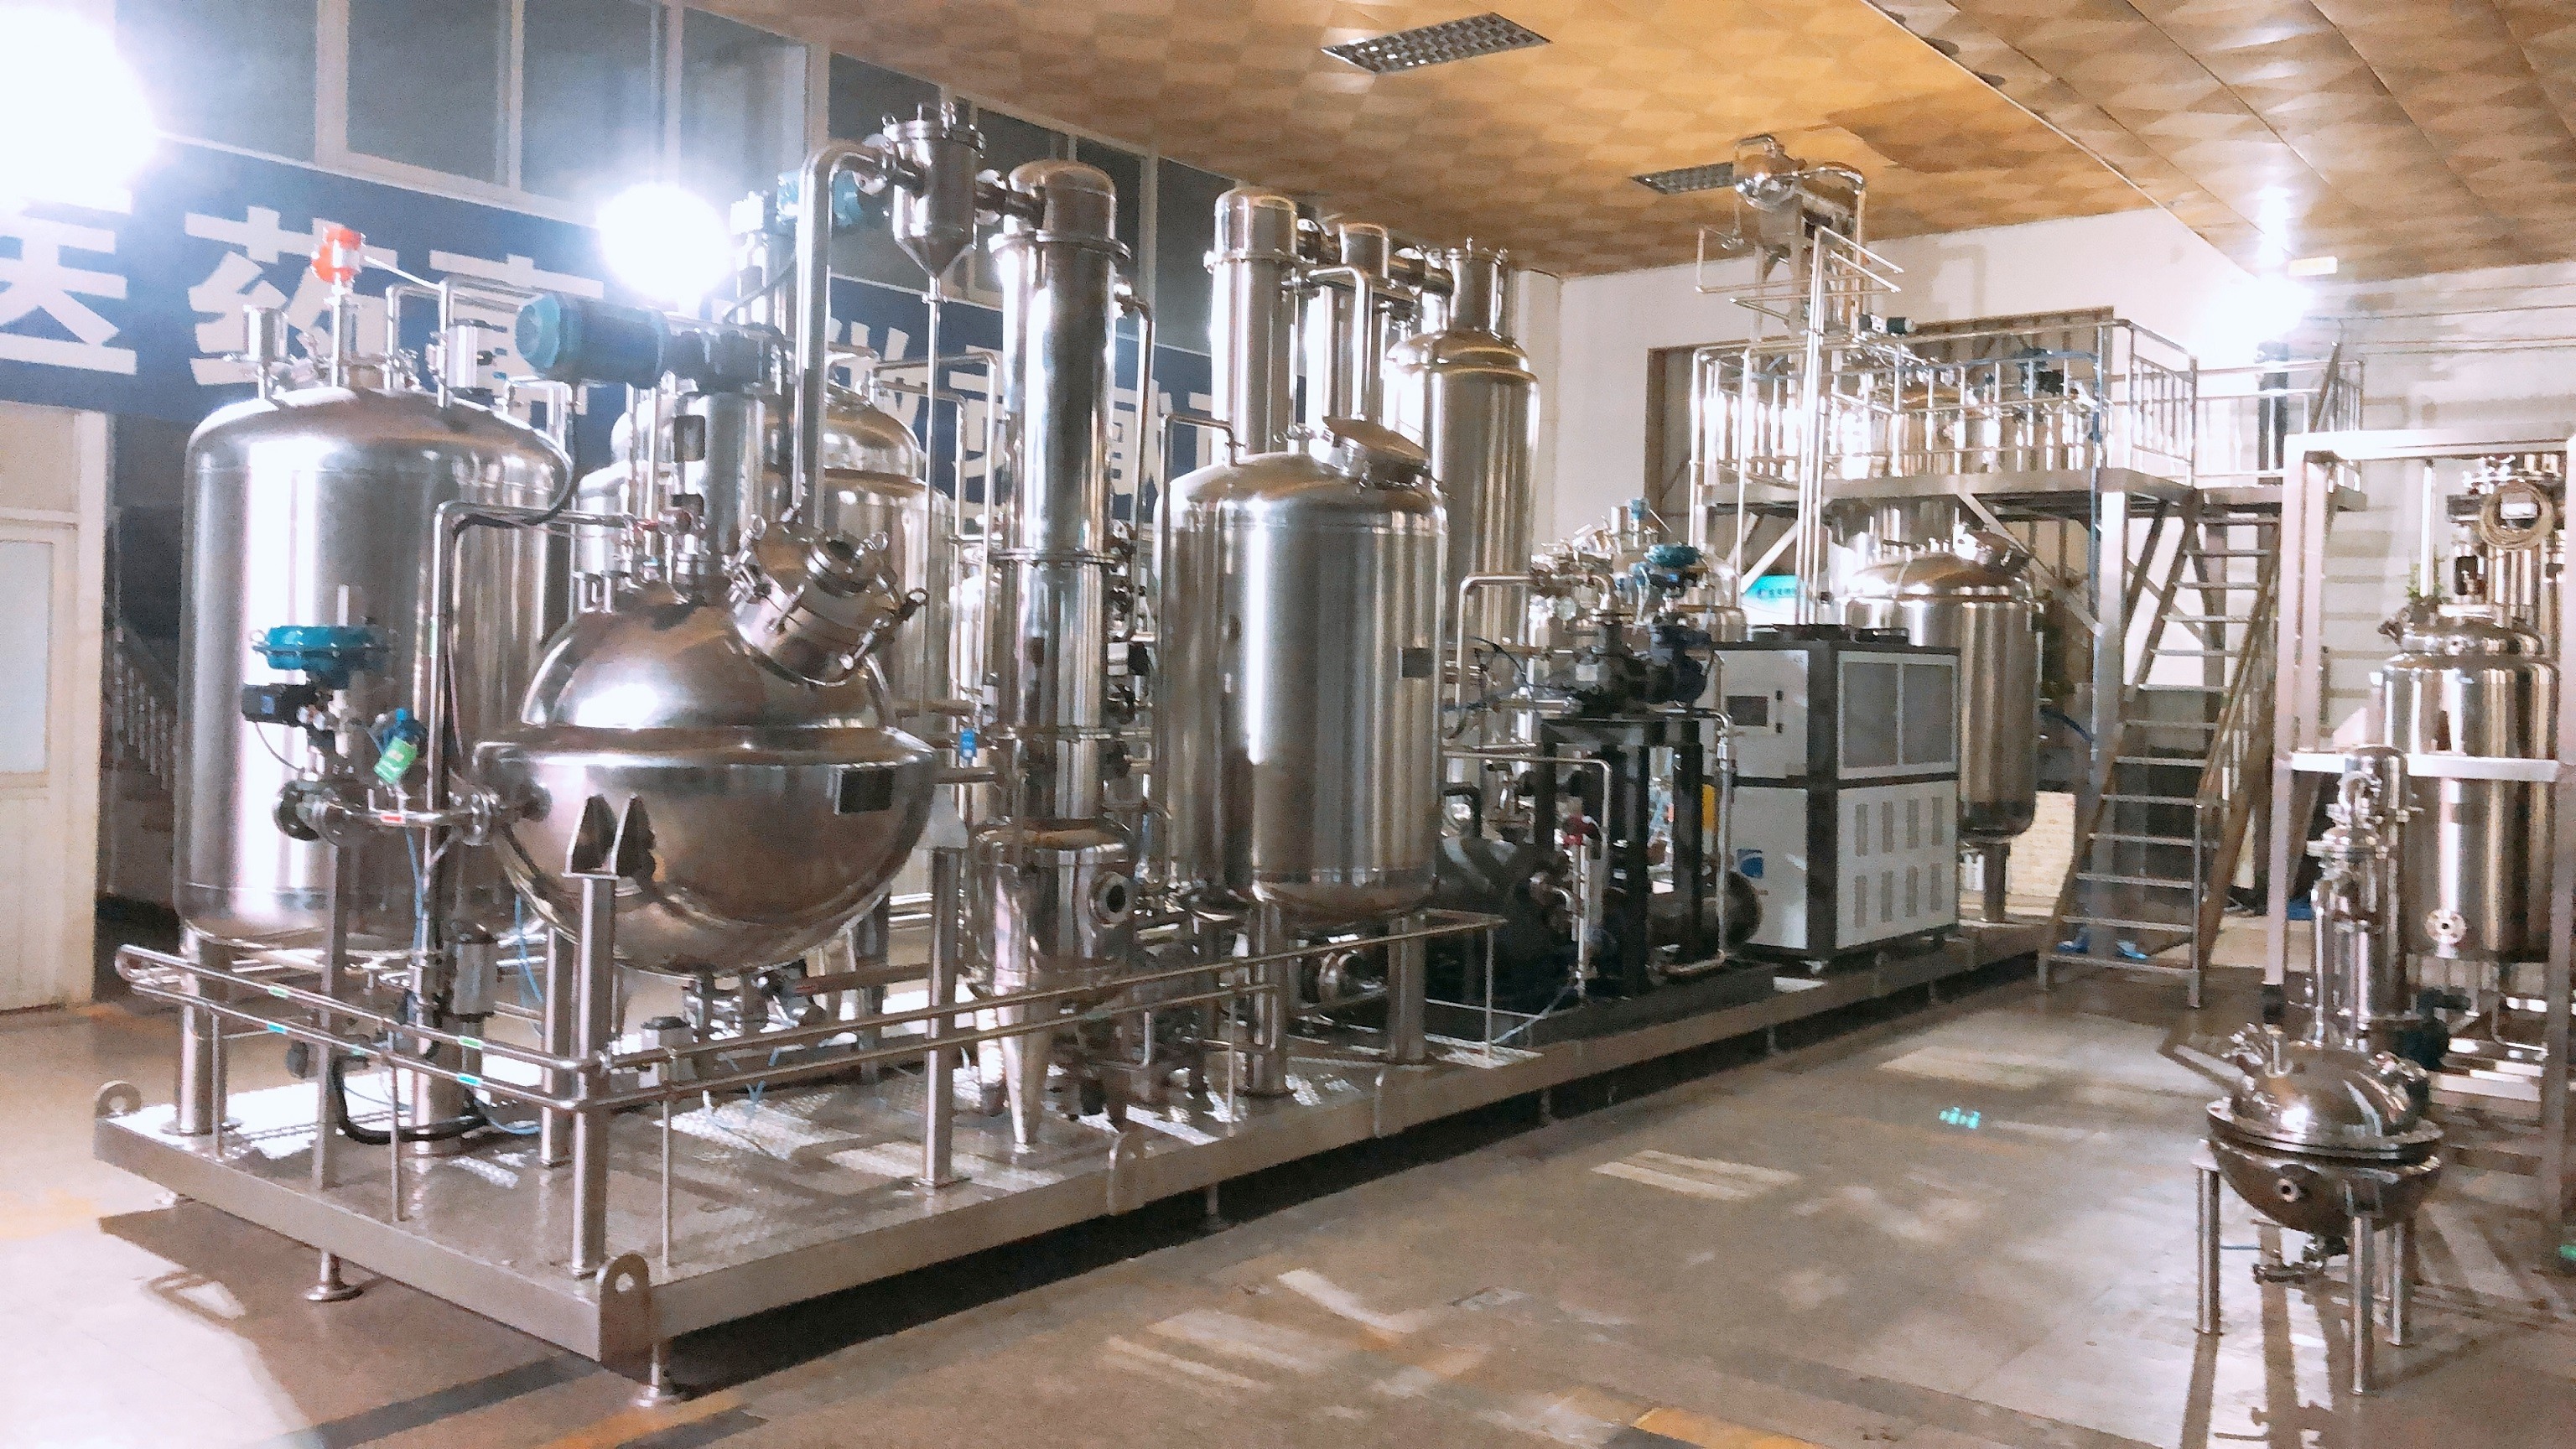 Quality Silver Herb Extraction Equipment Stainless Steel Supercritical Fluid Extraction for sale